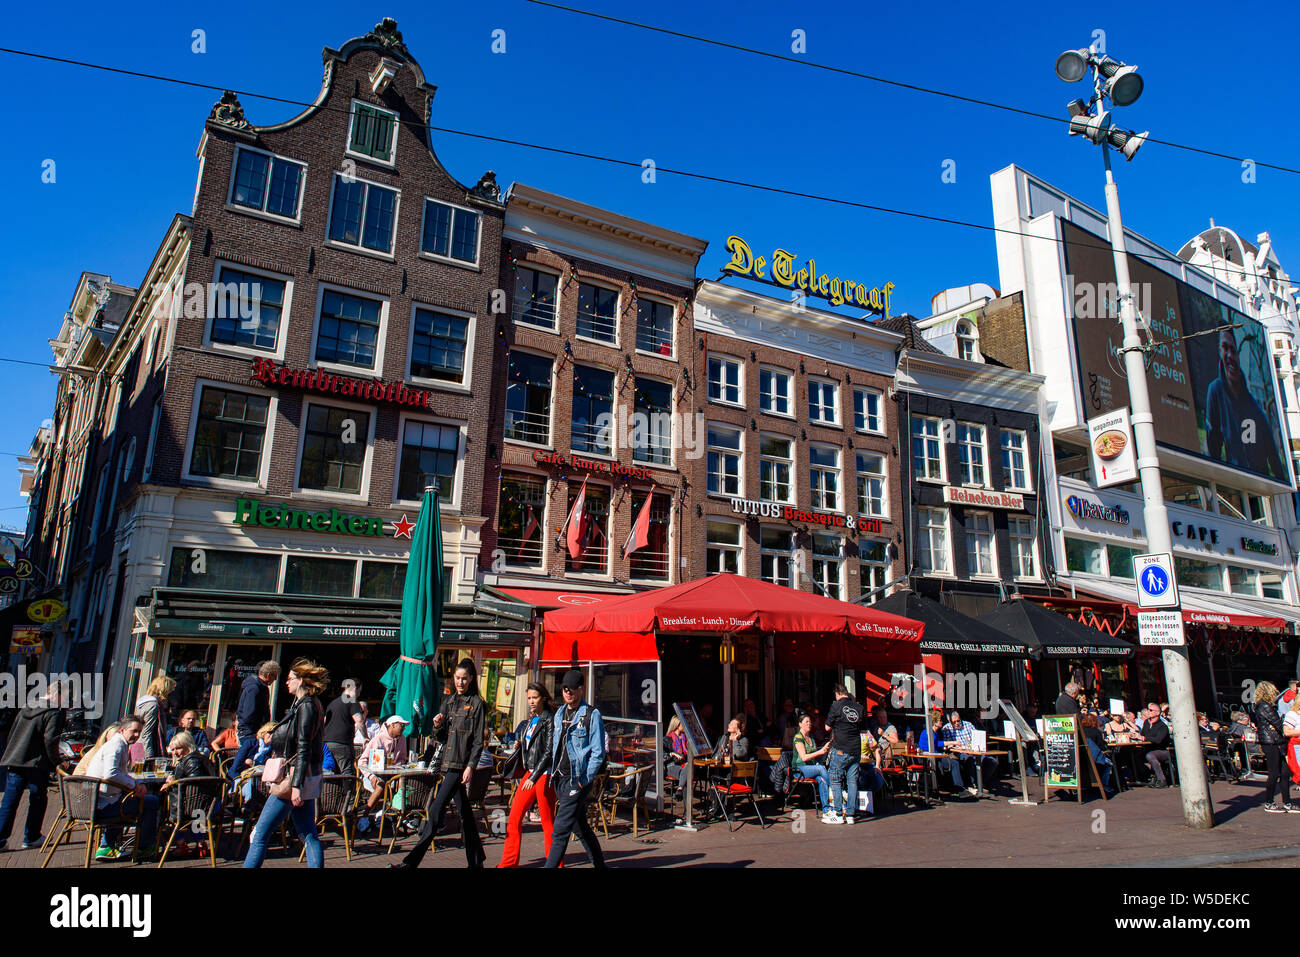 Rembrandtplein square in Amsterdam, Netherlands Stock Photo